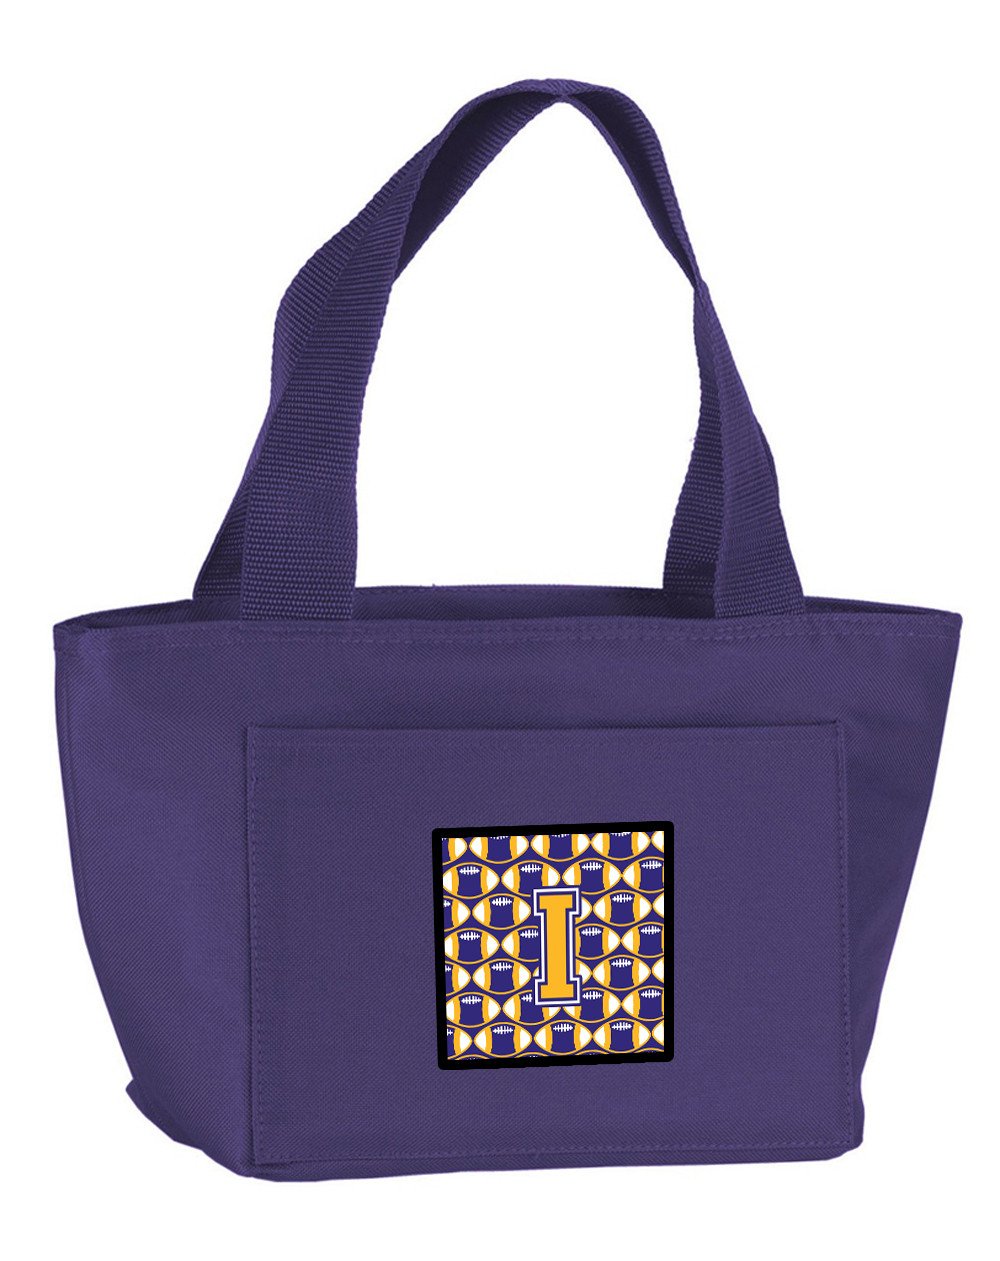 Letter I Football Purple and Gold Lunch Bag CJ1064-IPR-8808 by Caroline's Treasures